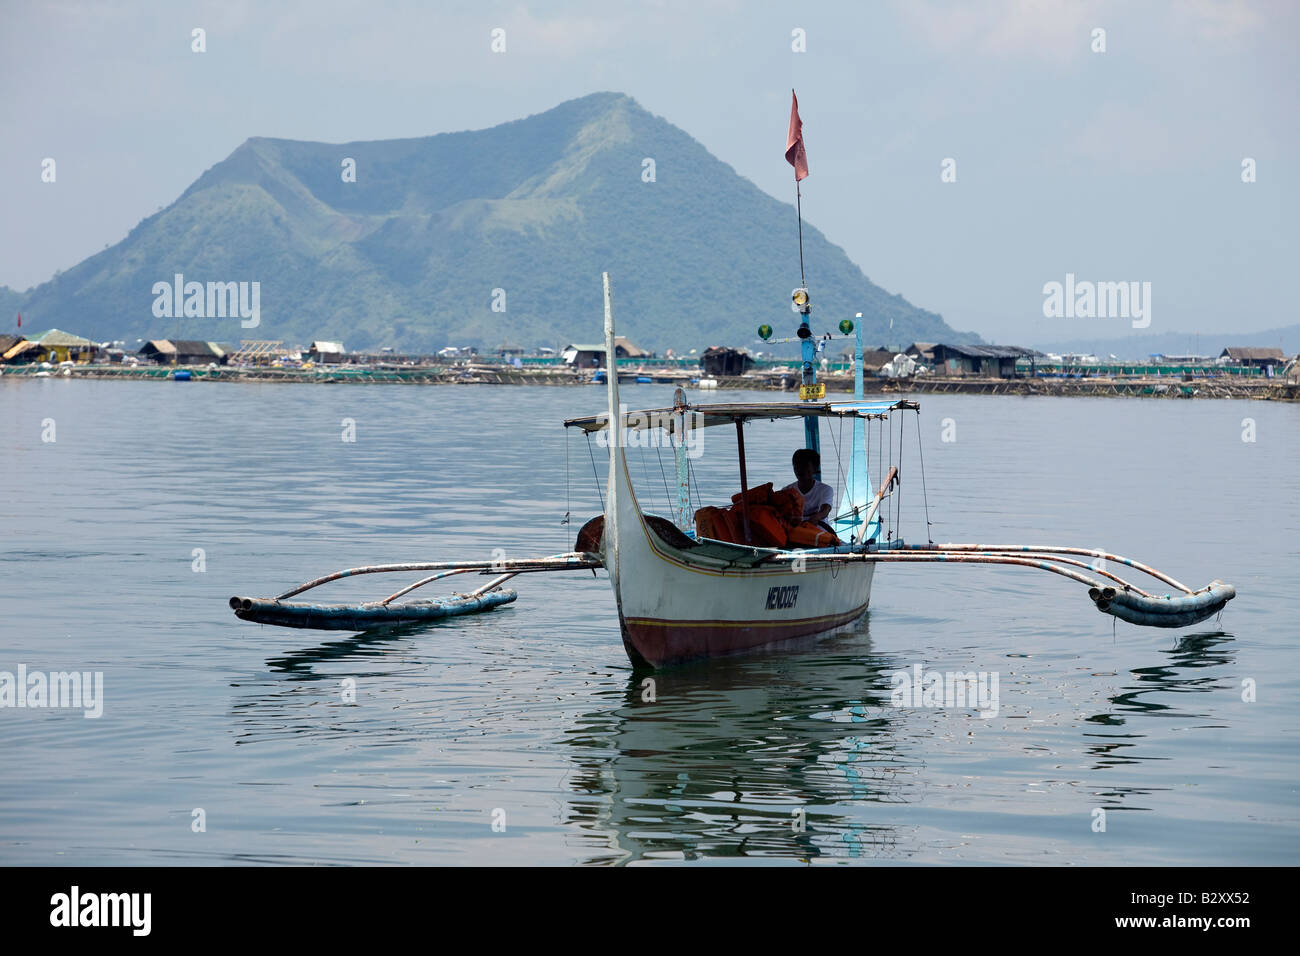 A Filipino maneuvers his boat on Taal Lake with a view of Volcano Island in the background near Tagaytay City, Philippines. Stock Photo